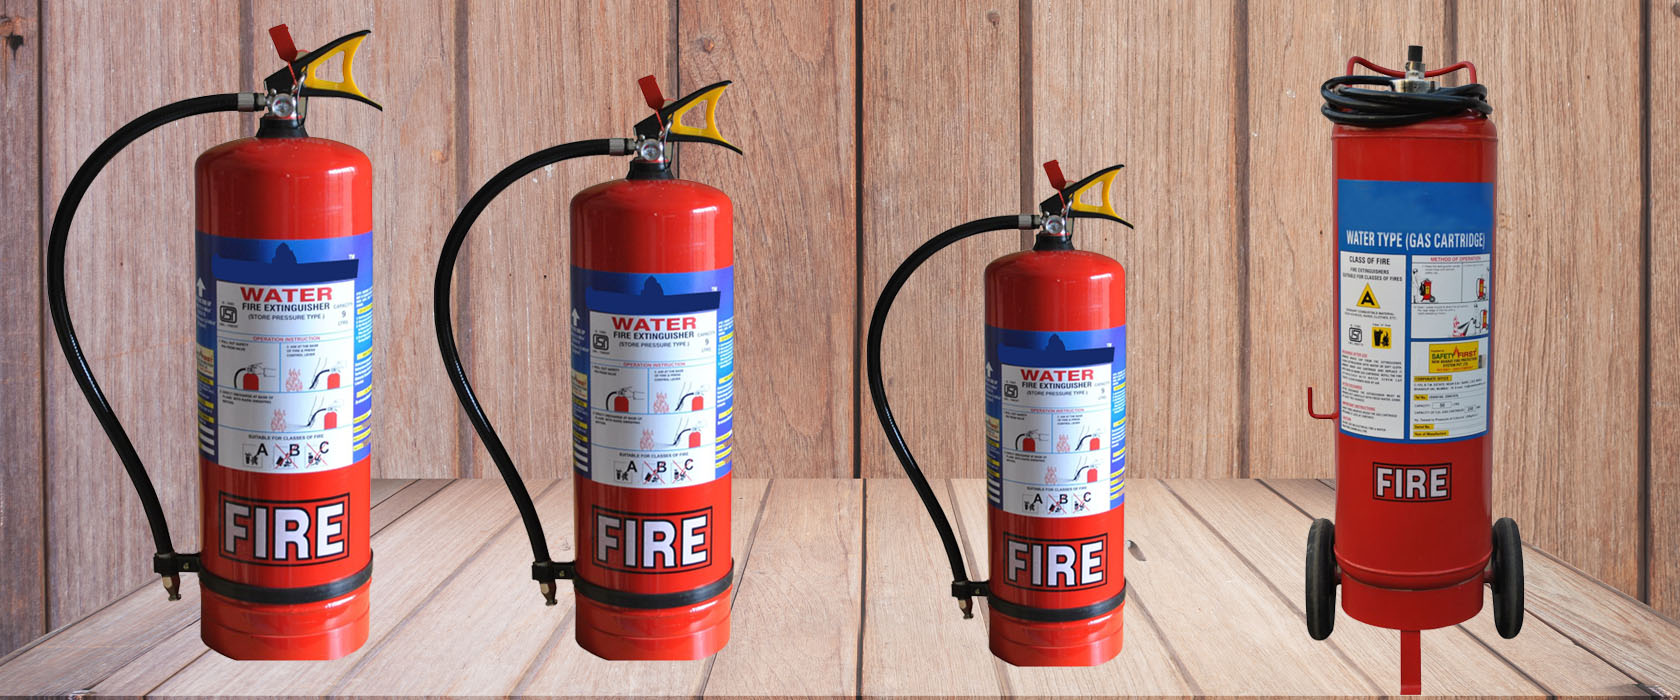 water fire extinguisher suppliers in chennai